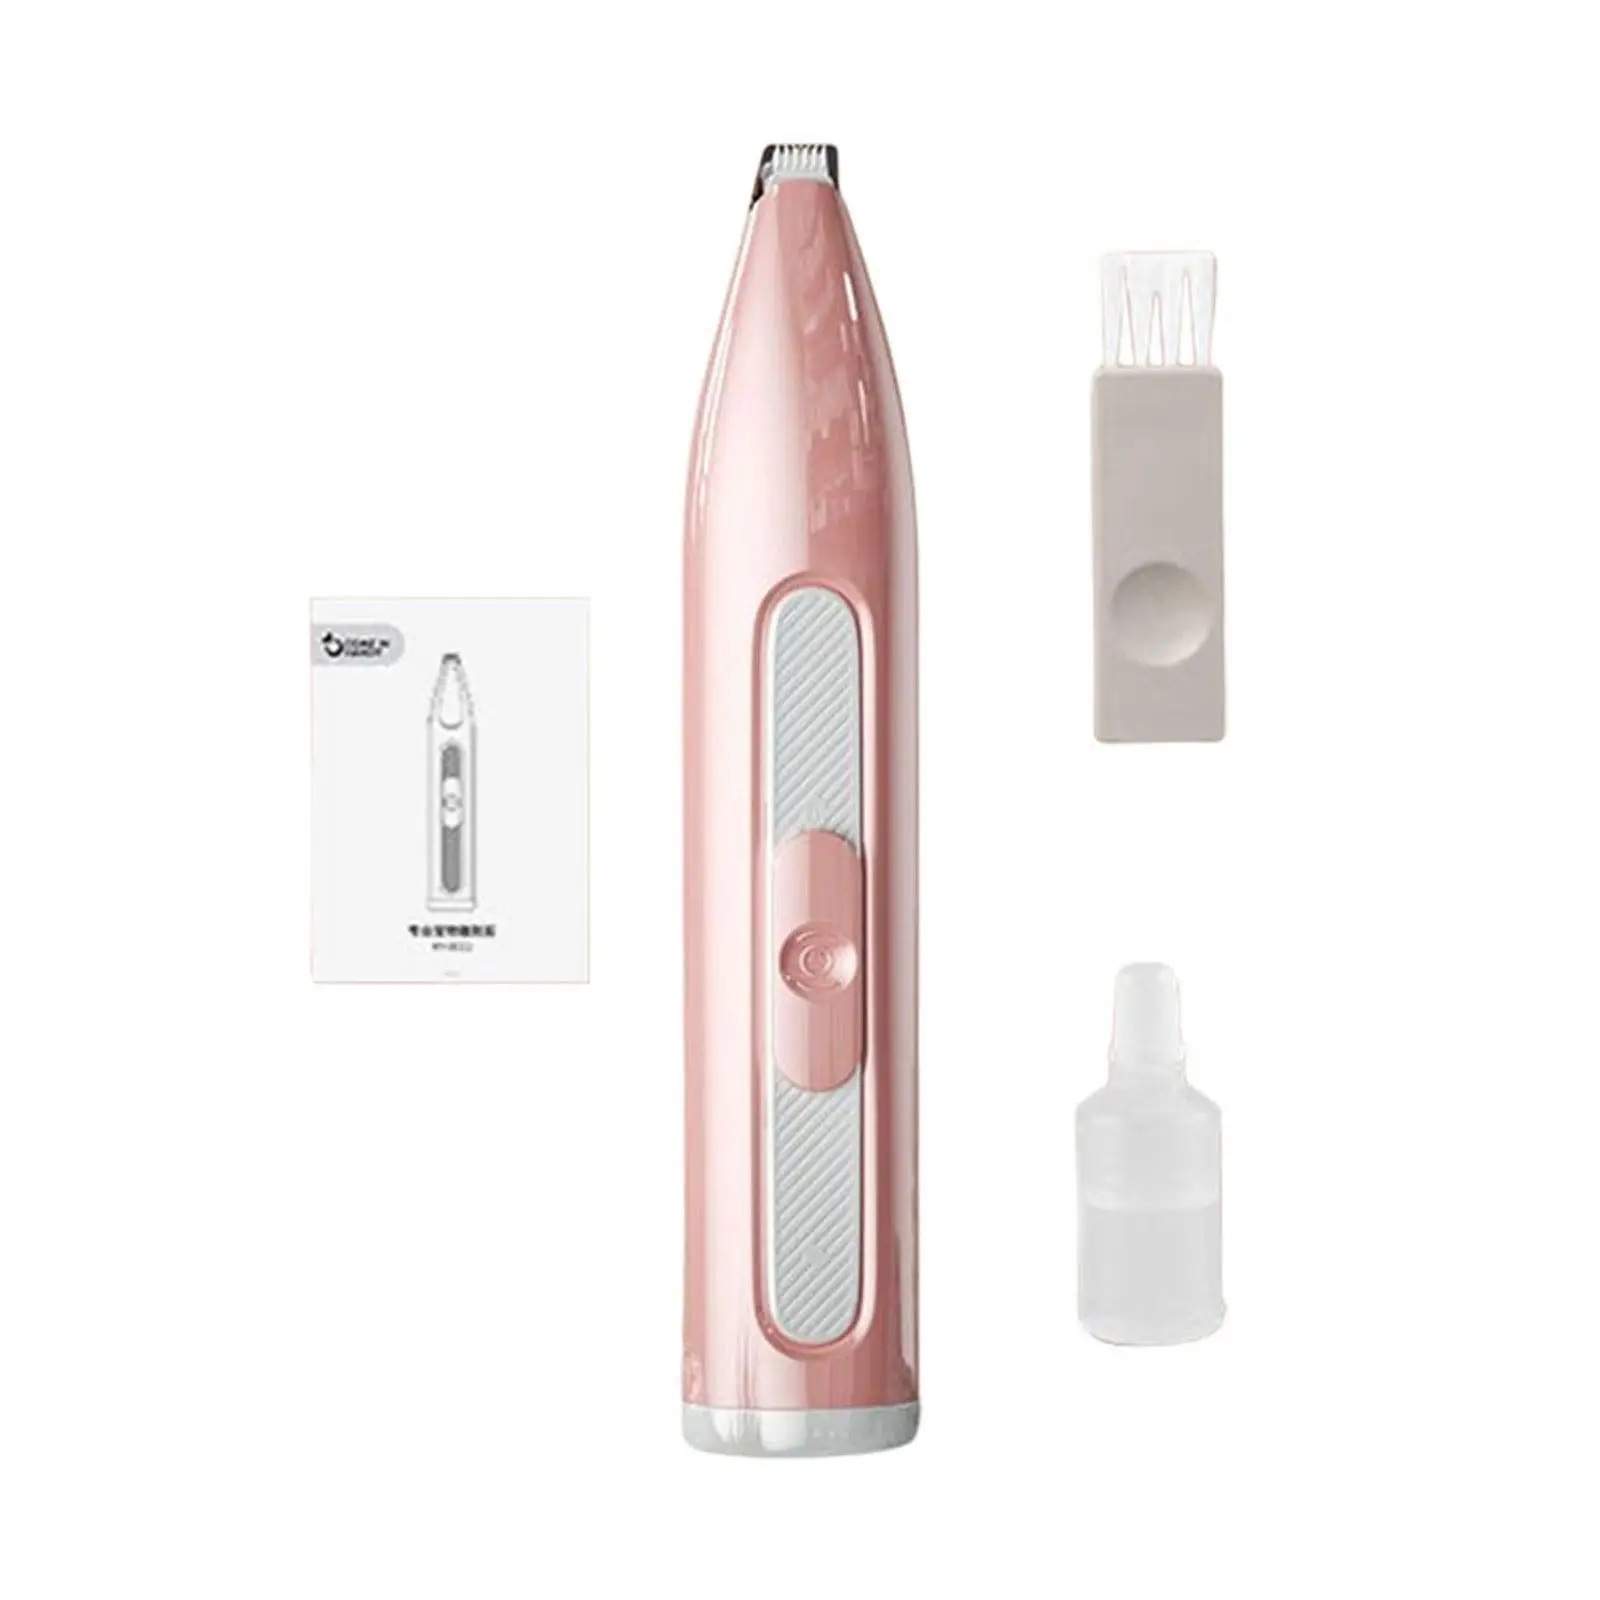 Electrical Pet Nail Hair Trimmer Dog Hair Clipper Tool Quiet Kitten Haircut Cordless Small for Cats Trimming Toes Paw Eyes Rump